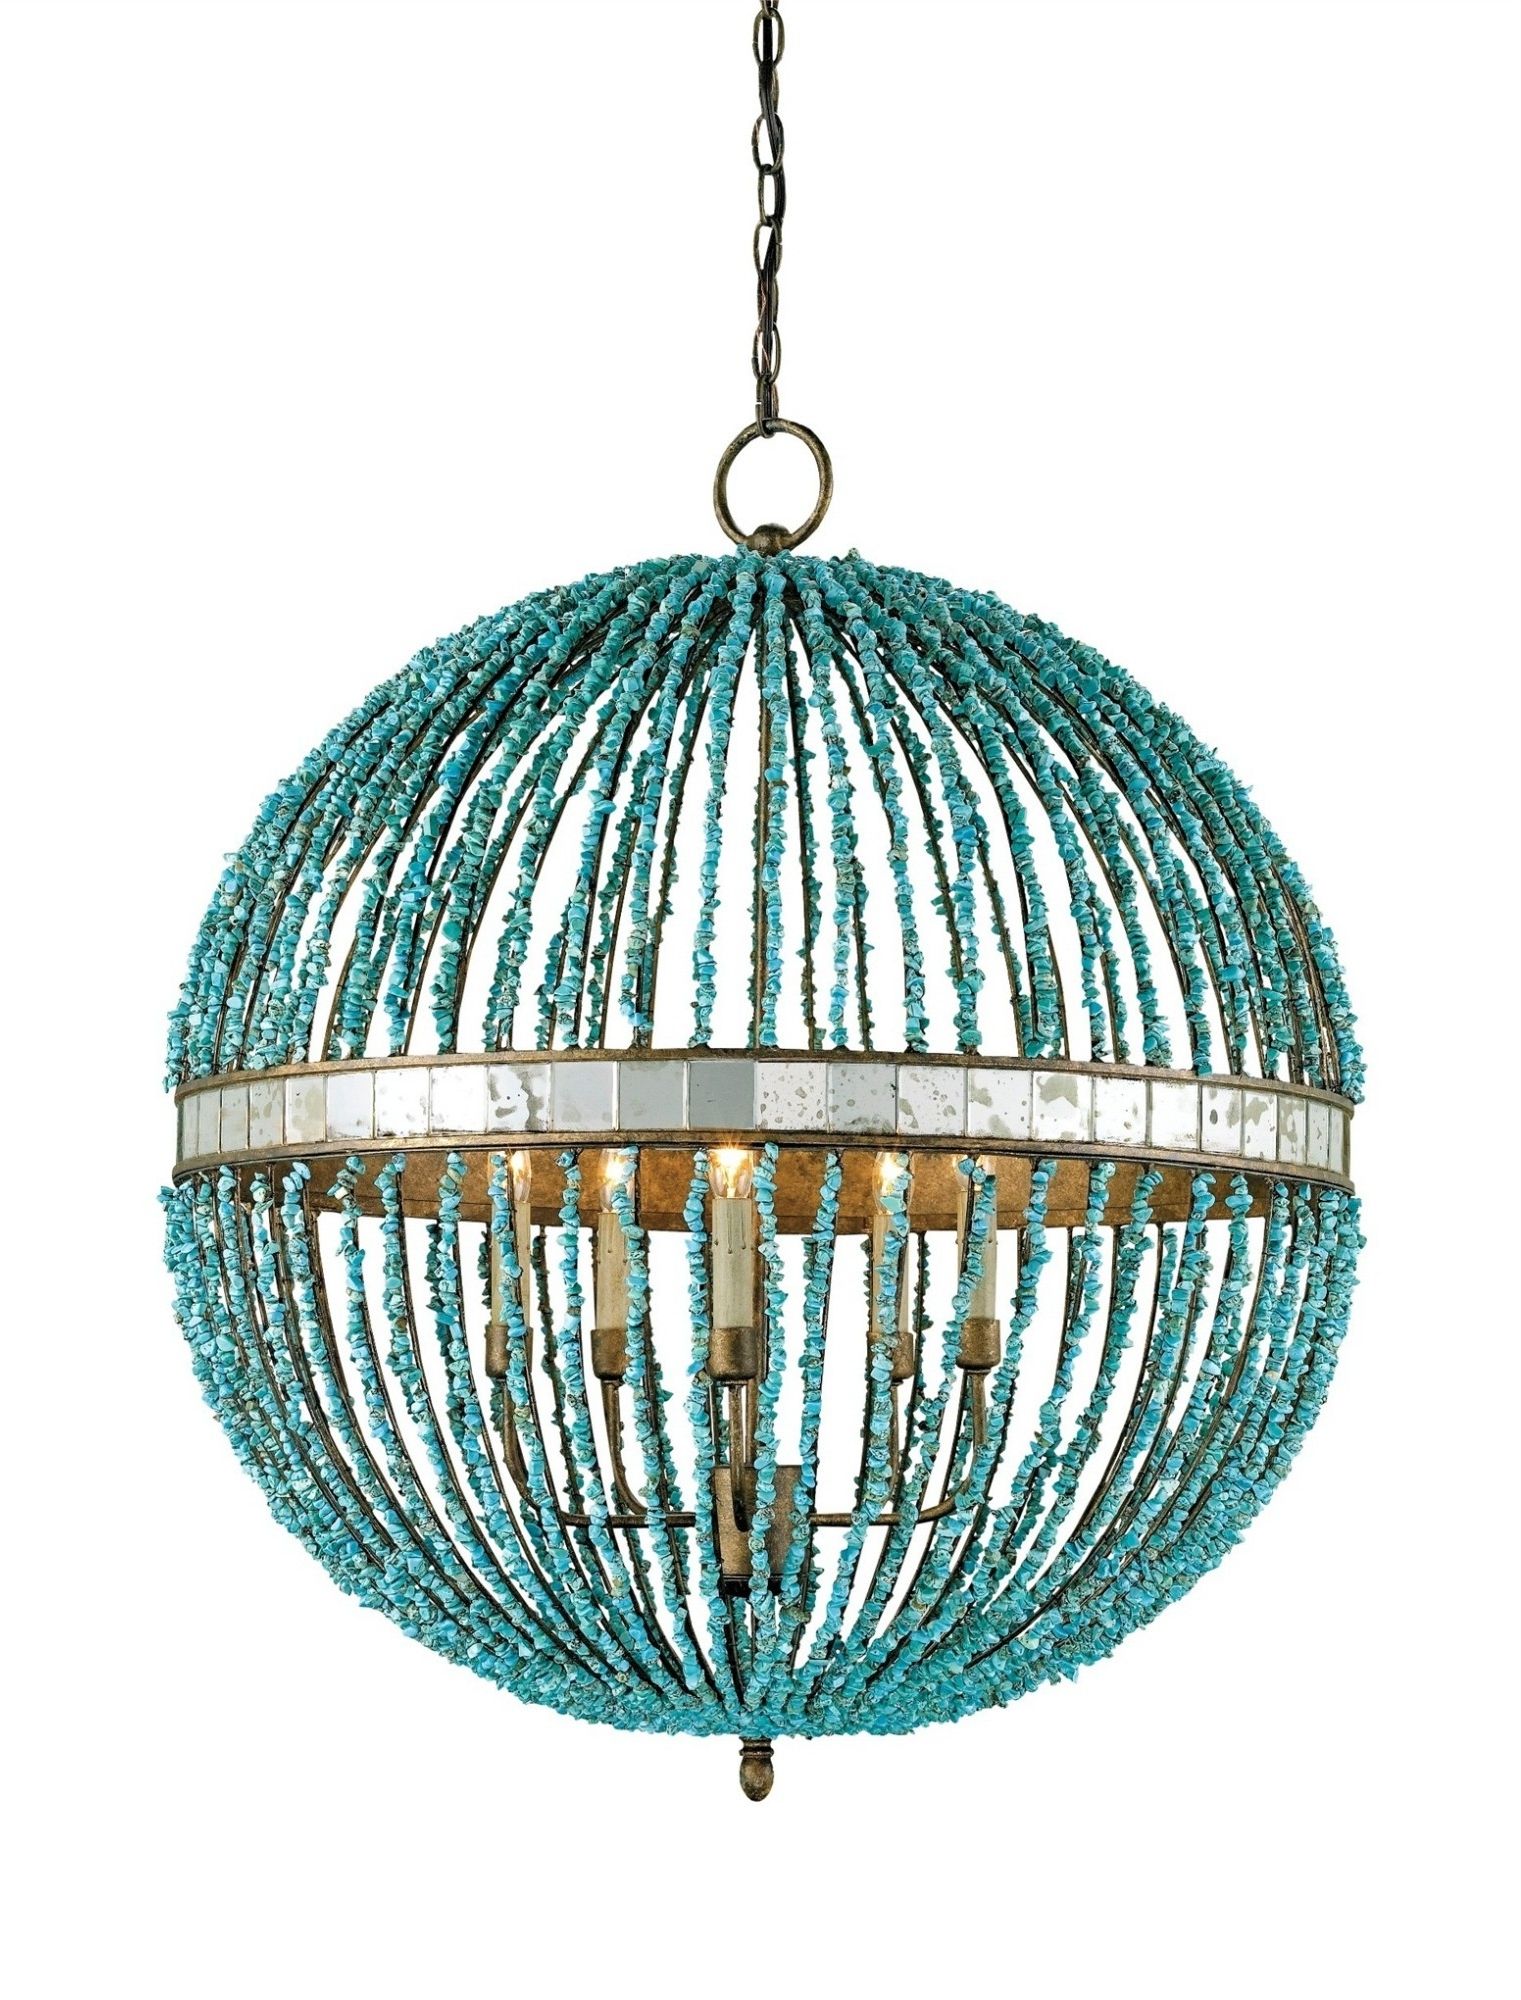 Featured Photo of 15 Best Collection of Turquoise Orb Chandeliers